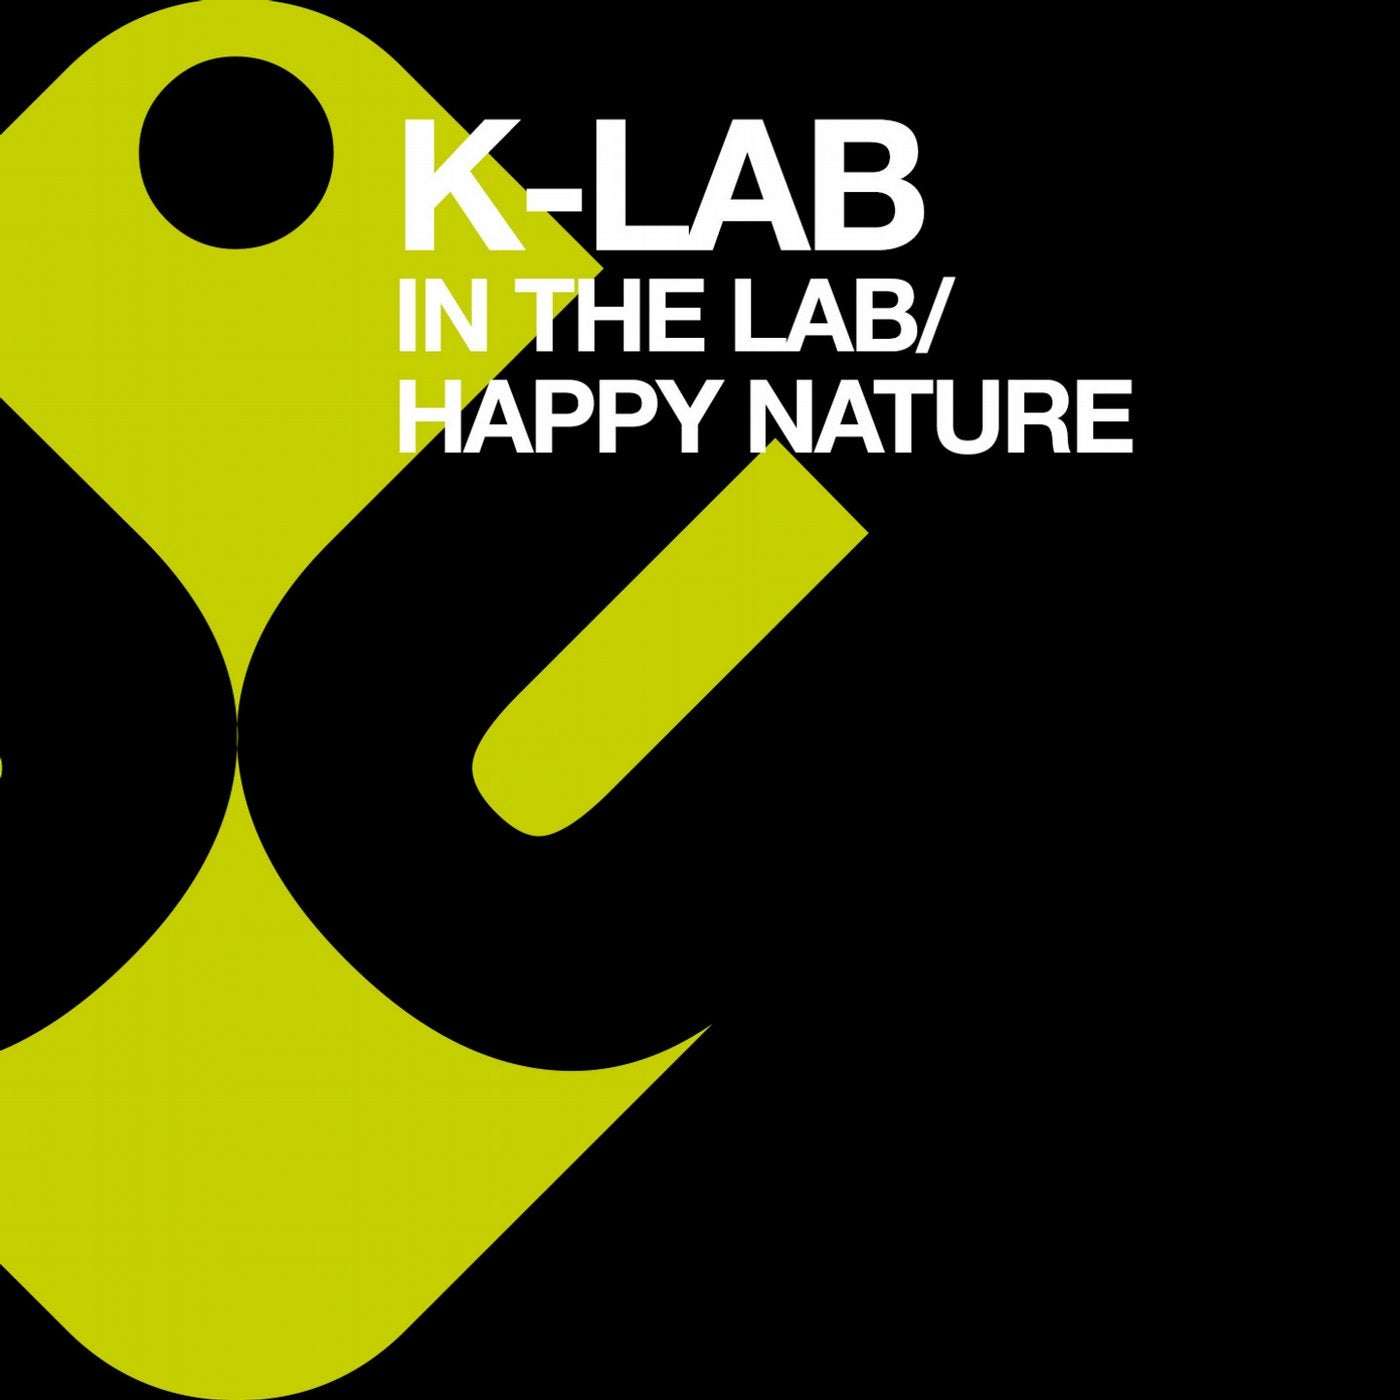 In the Lab / Happy Nature